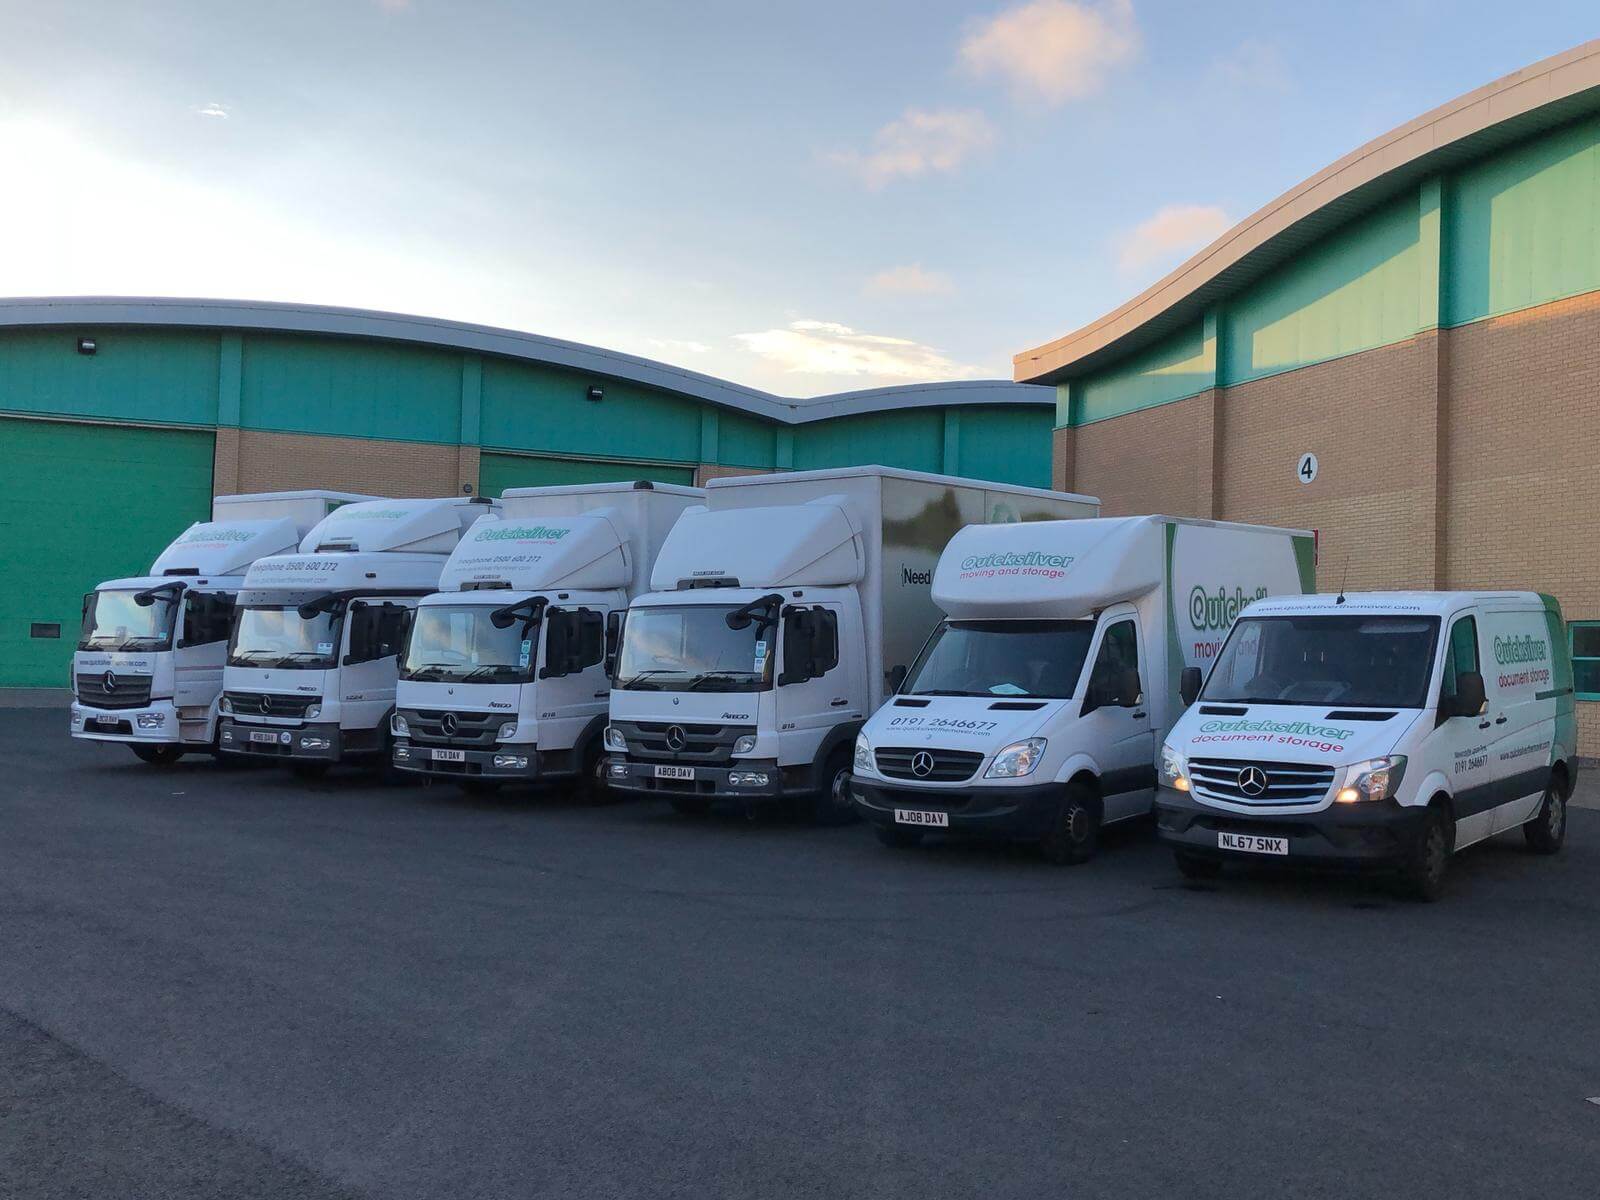 The Quicksilver fleet of moving vehicles